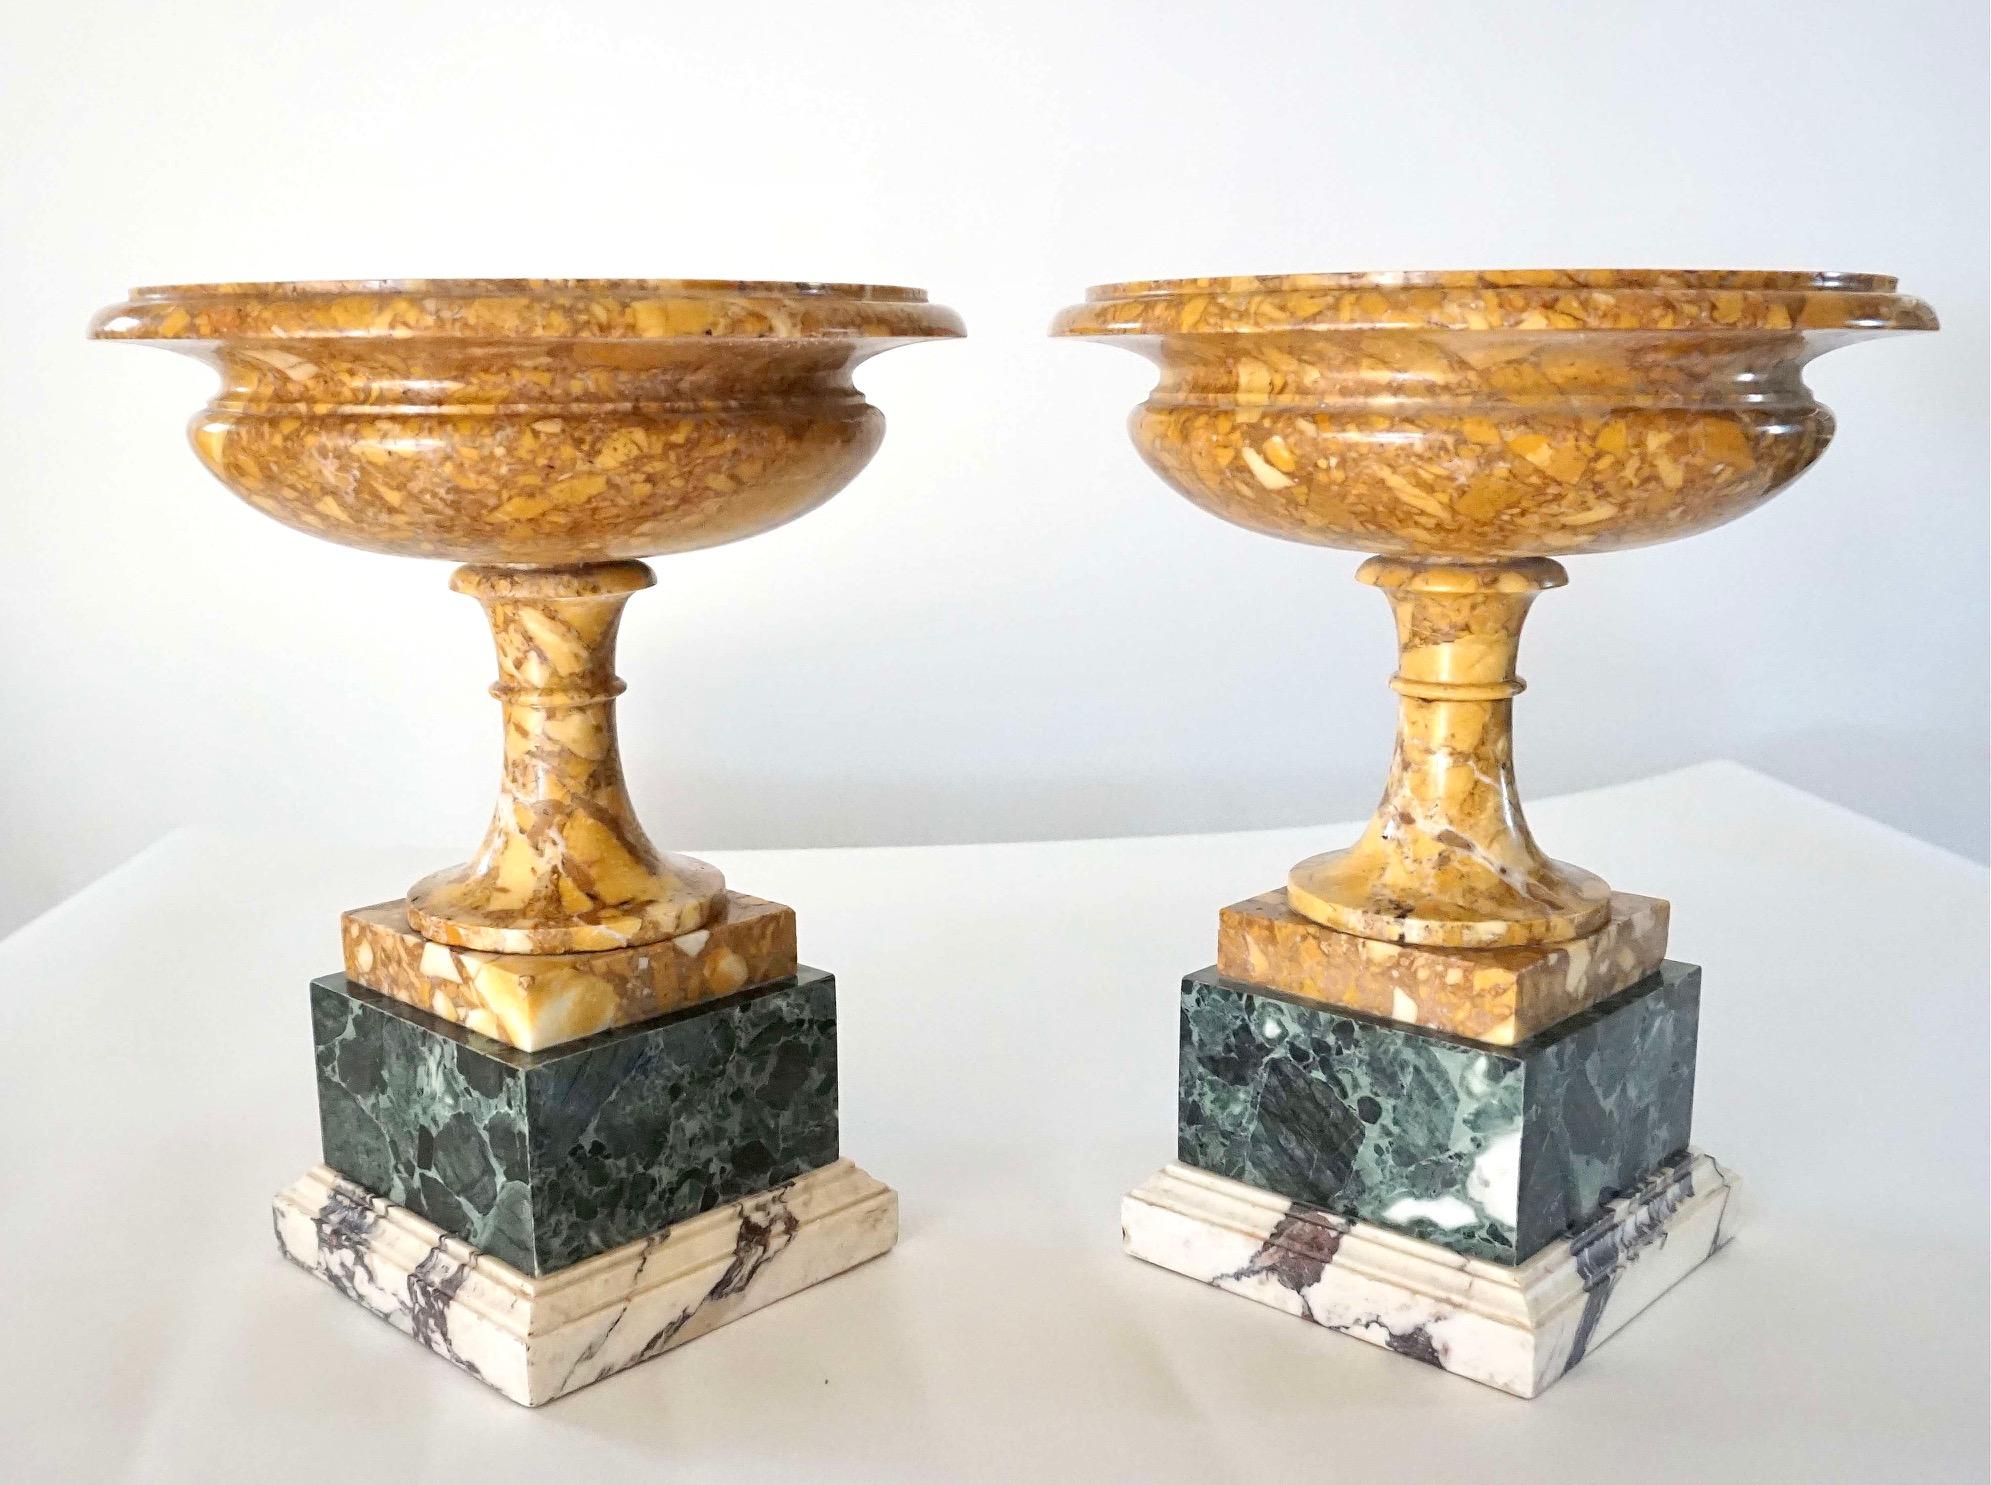 Pair of 19th Century Italian Neoclassical Tazze in Polychrome Marbles For Sale 6